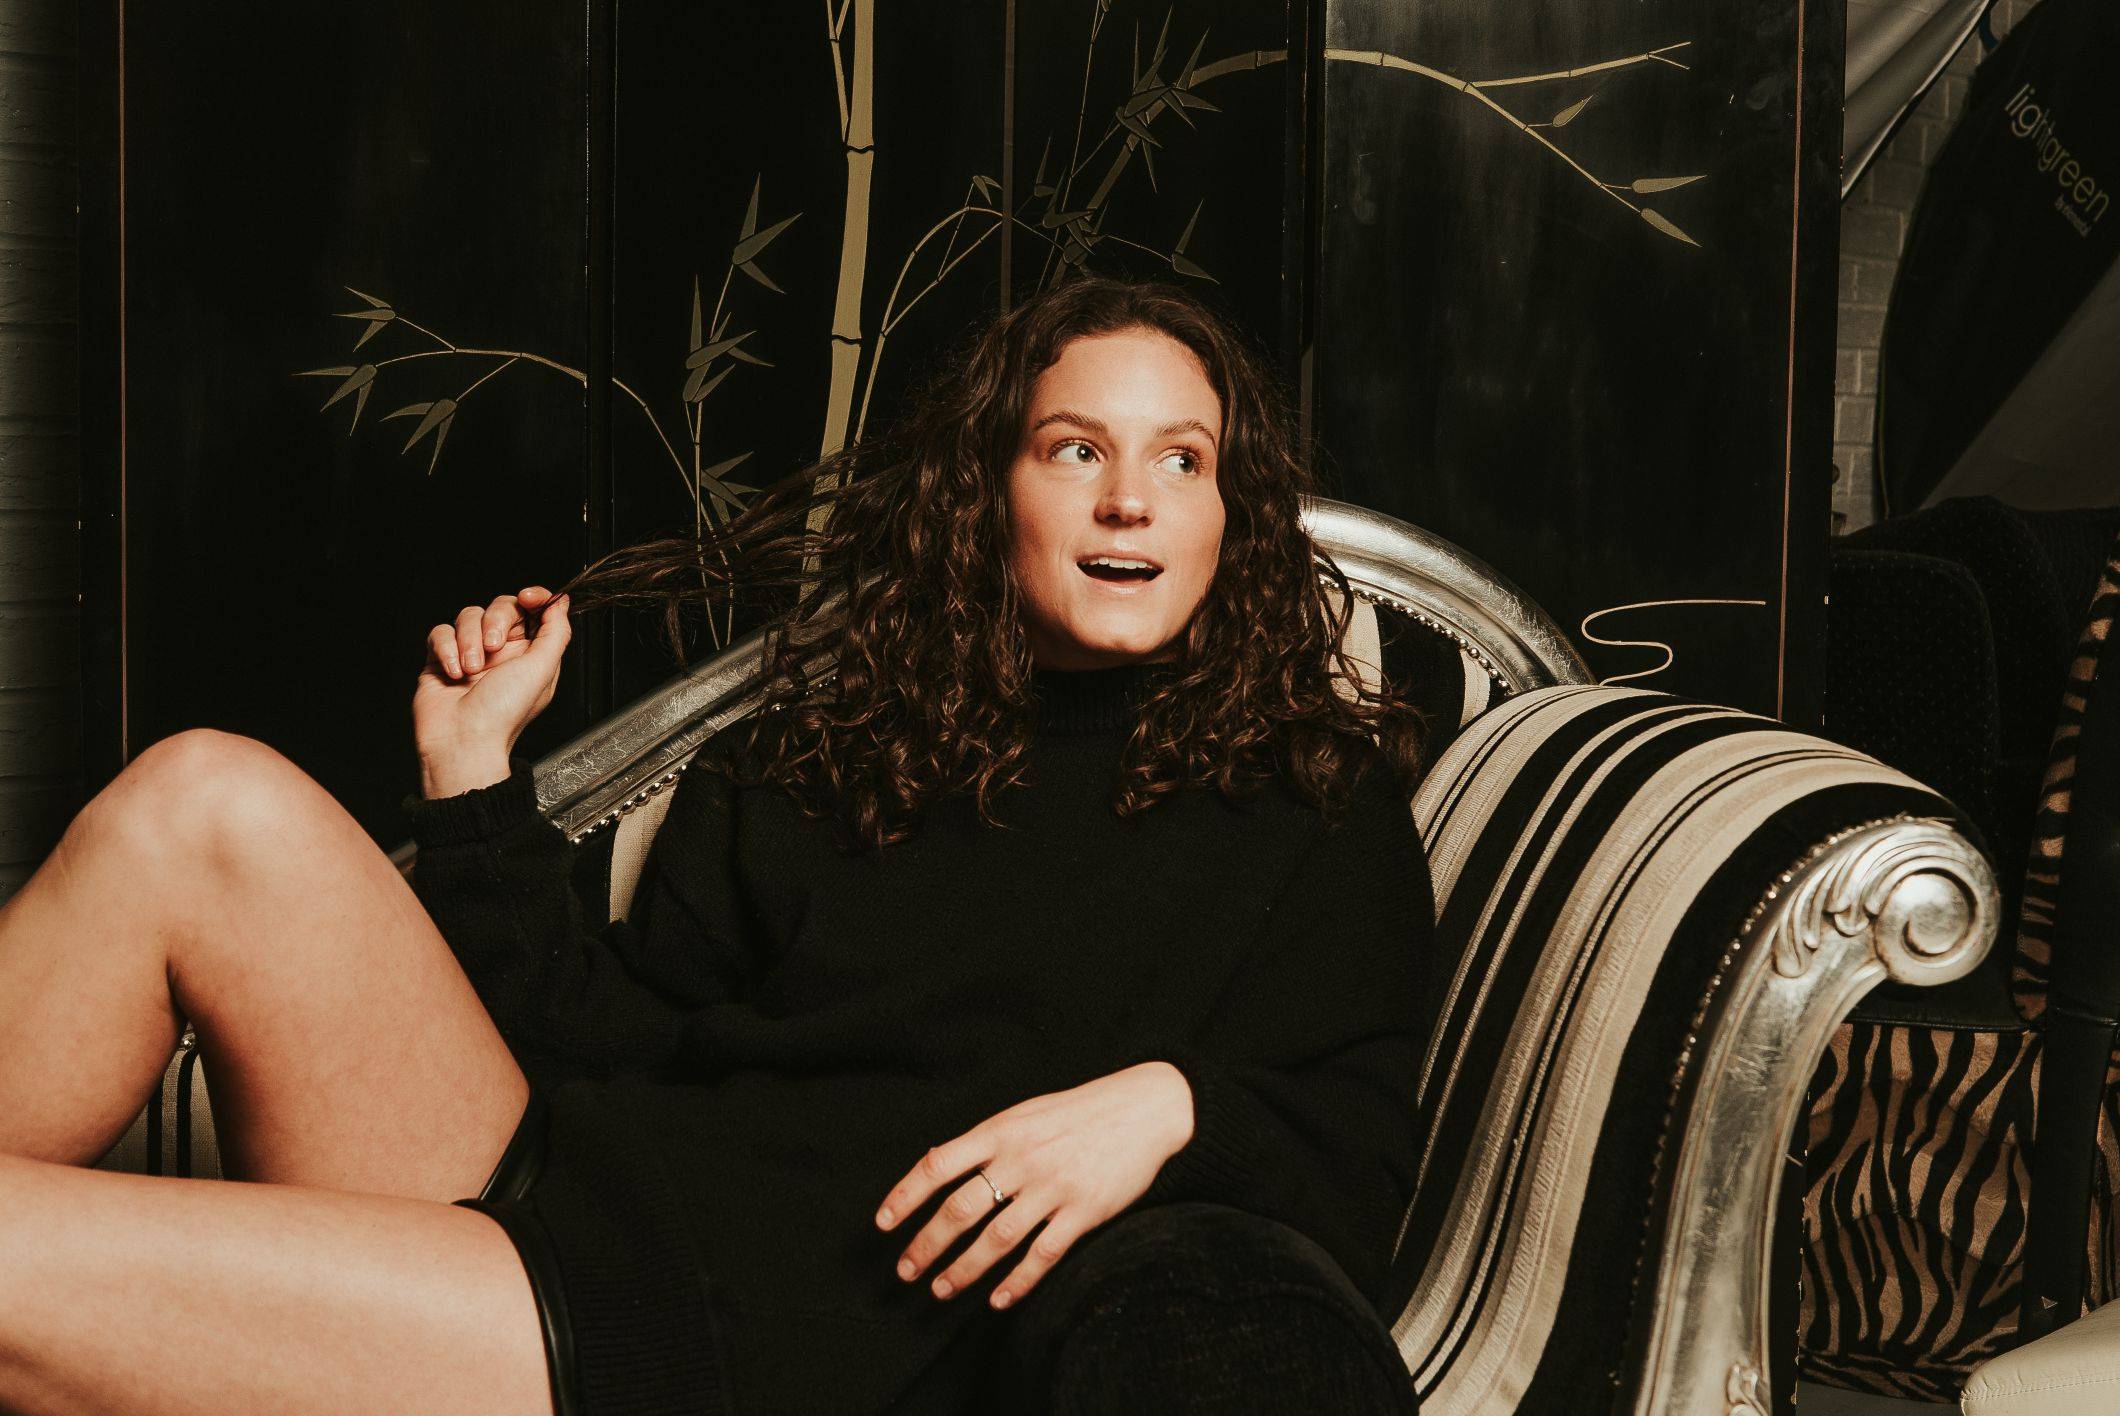 Image of a woman with a wavy hair sitting on the couch